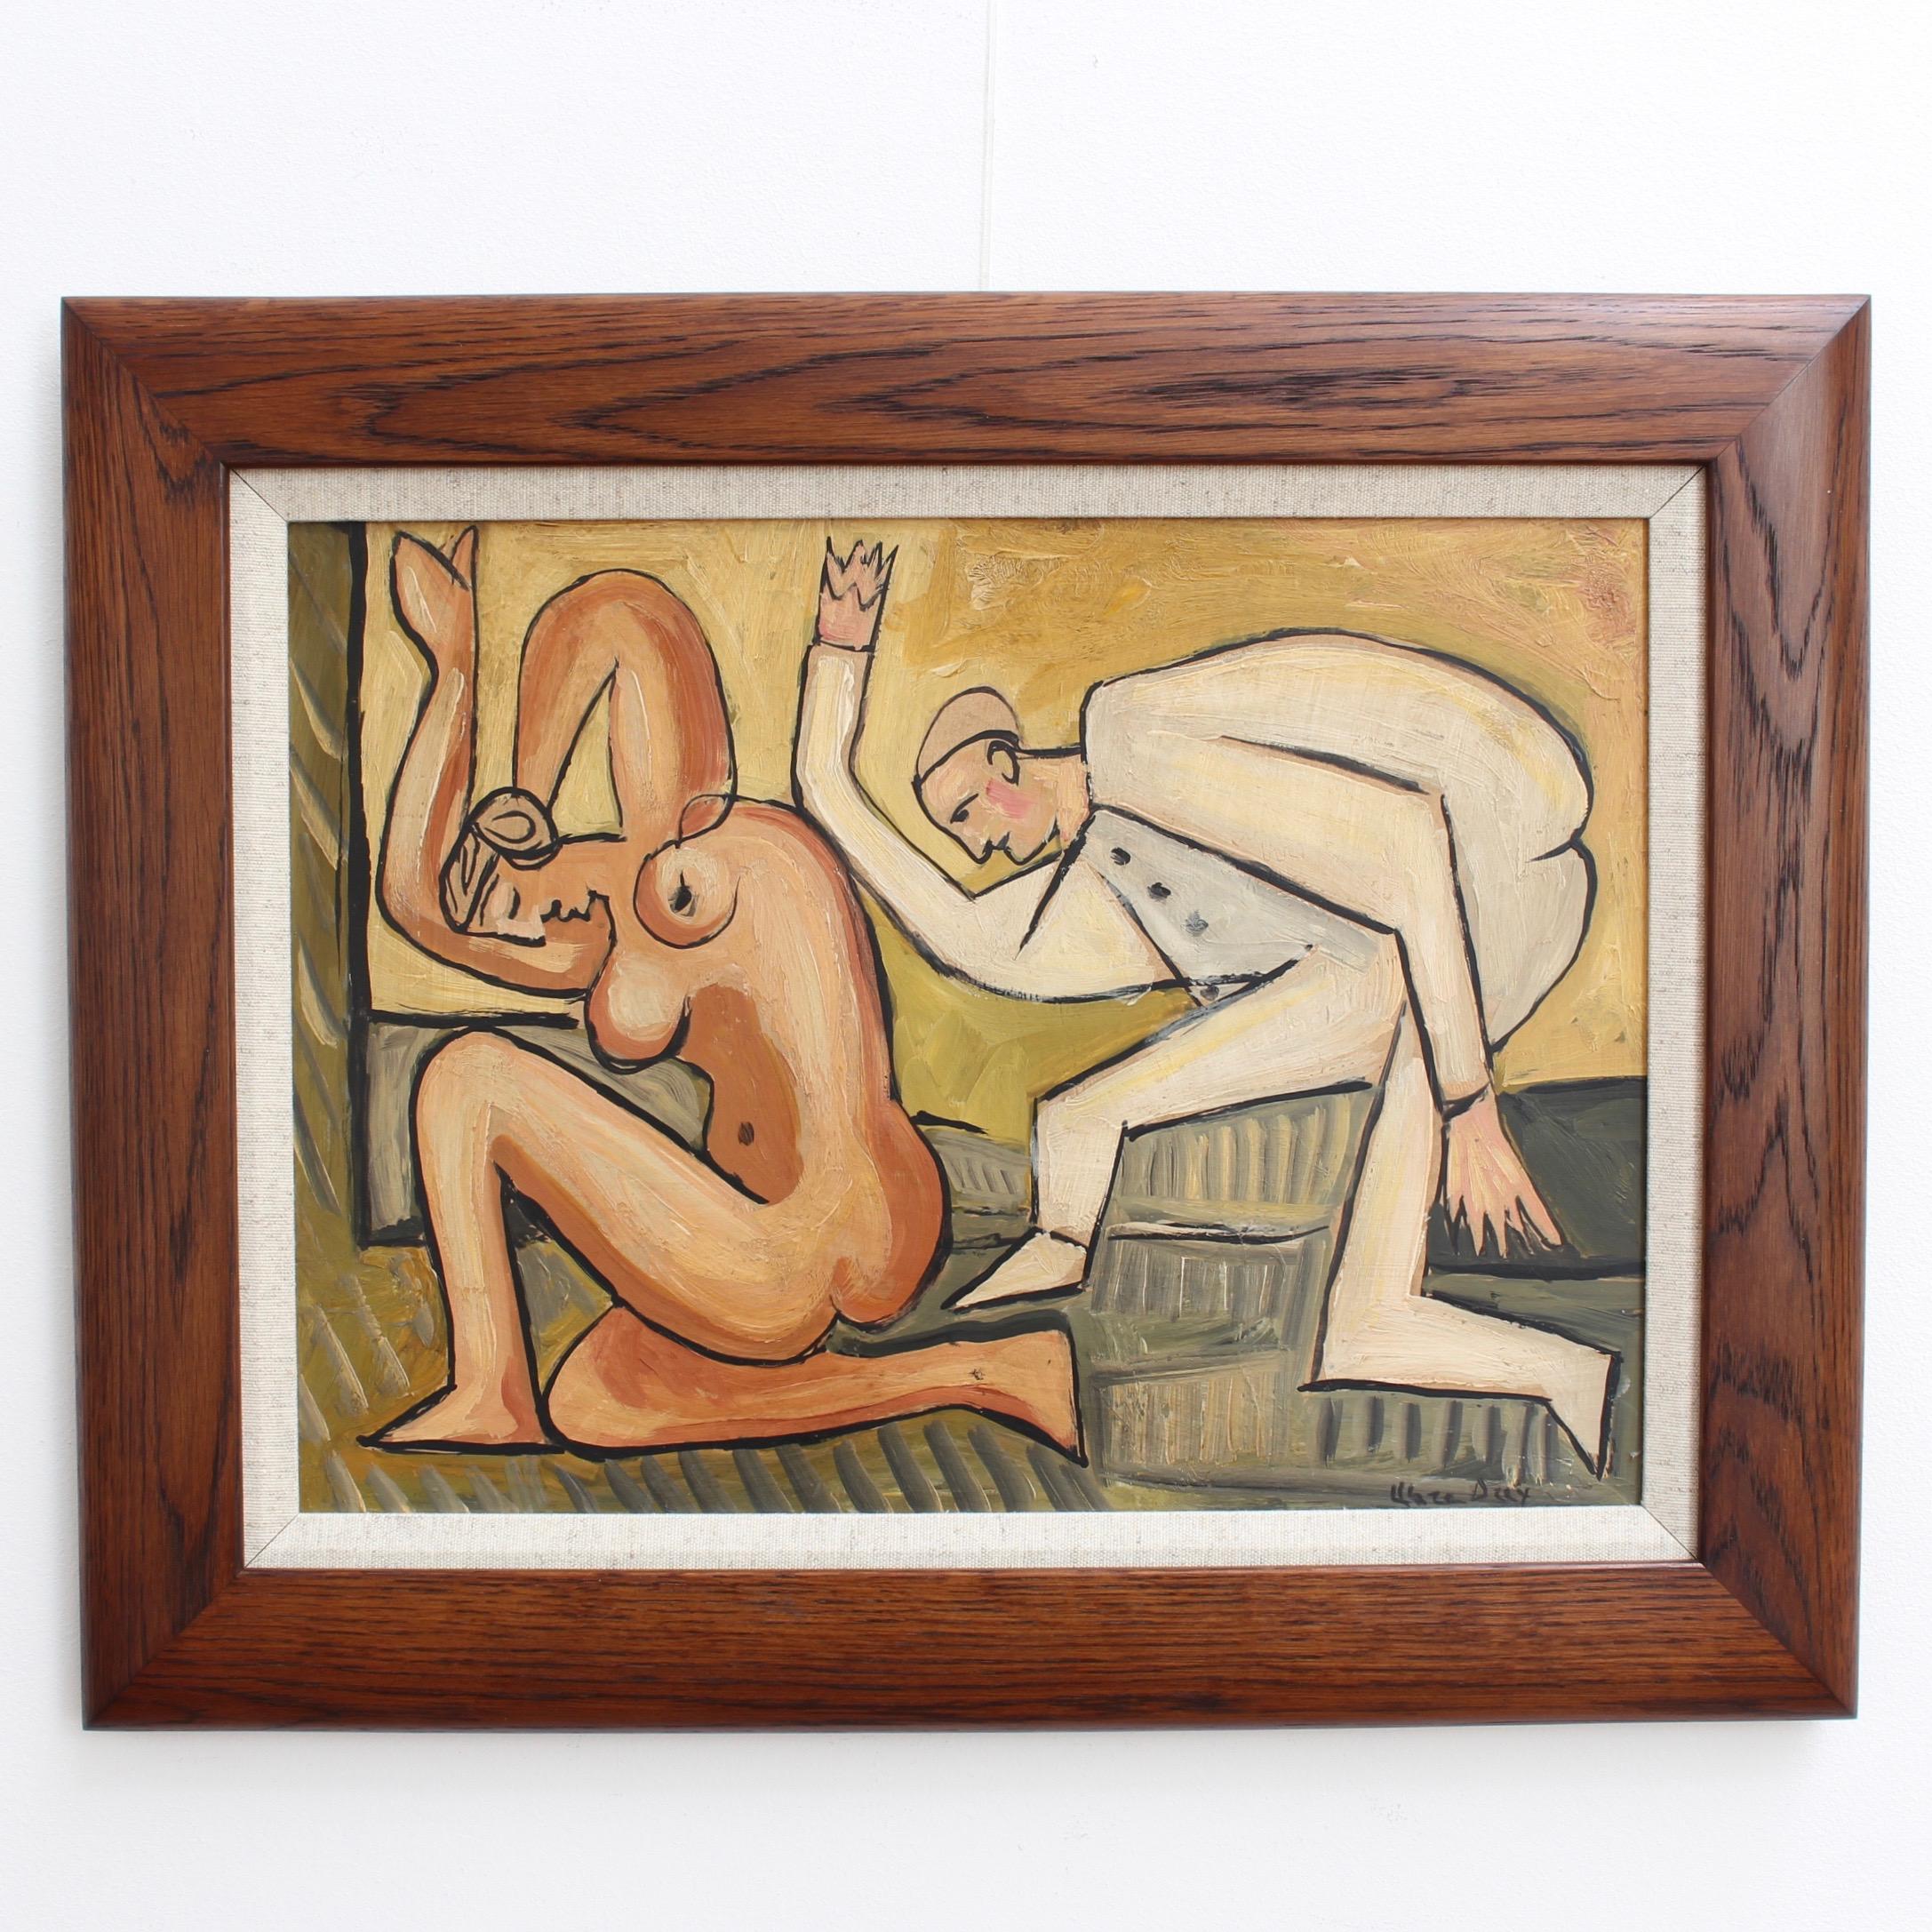 'Kneeling Nude and Mysterious Figure', Berlin School after Picasso - Painting by Unknown